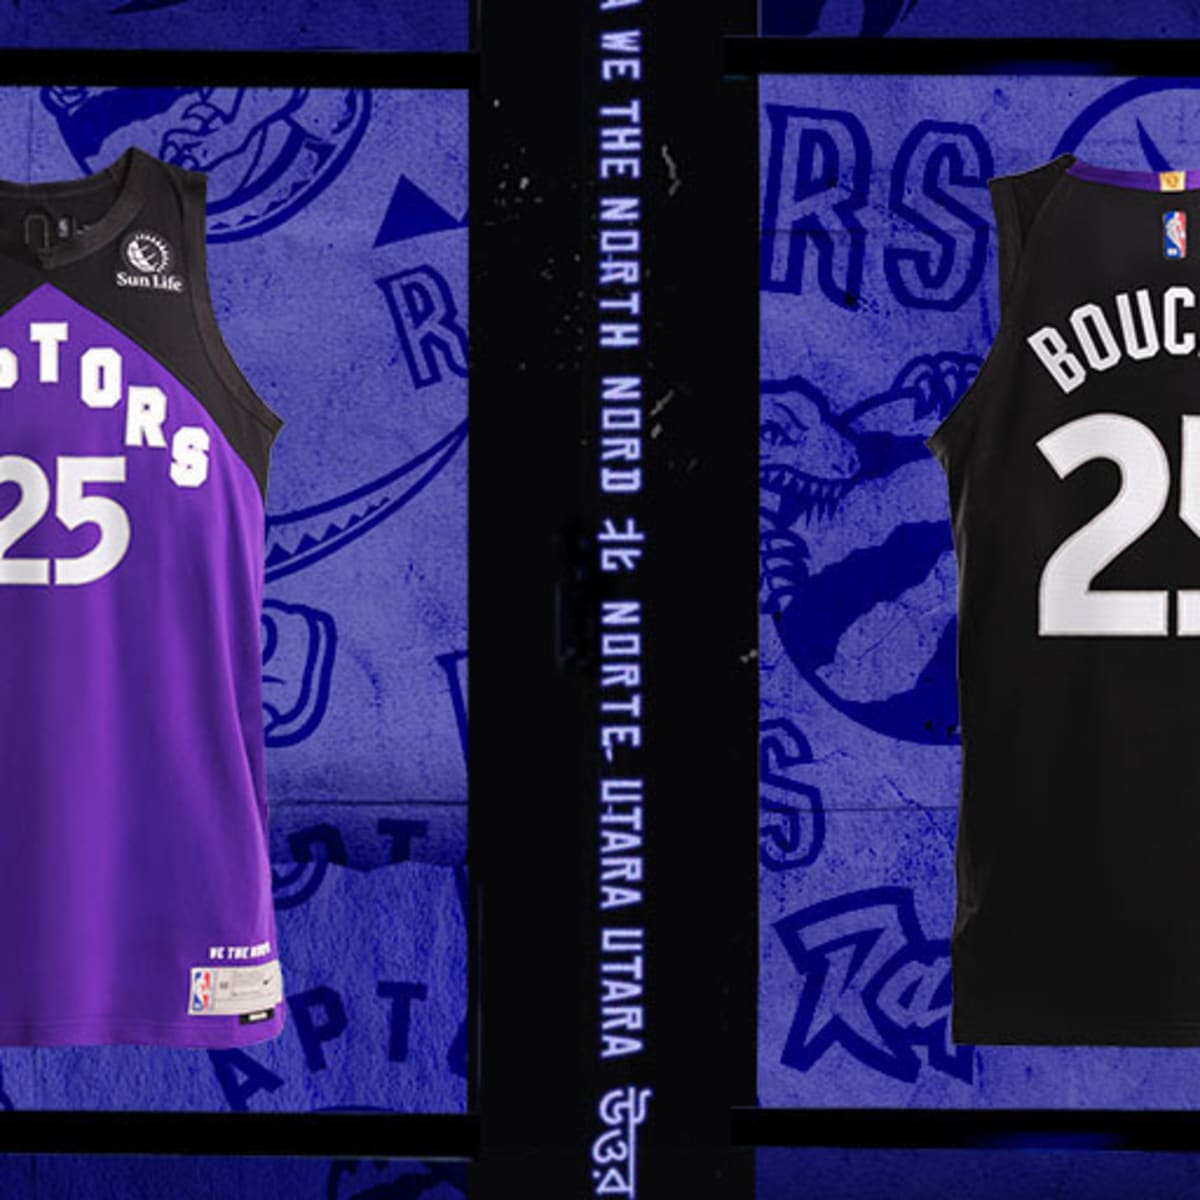 The Toronto Raptors just got a new jersey design with an